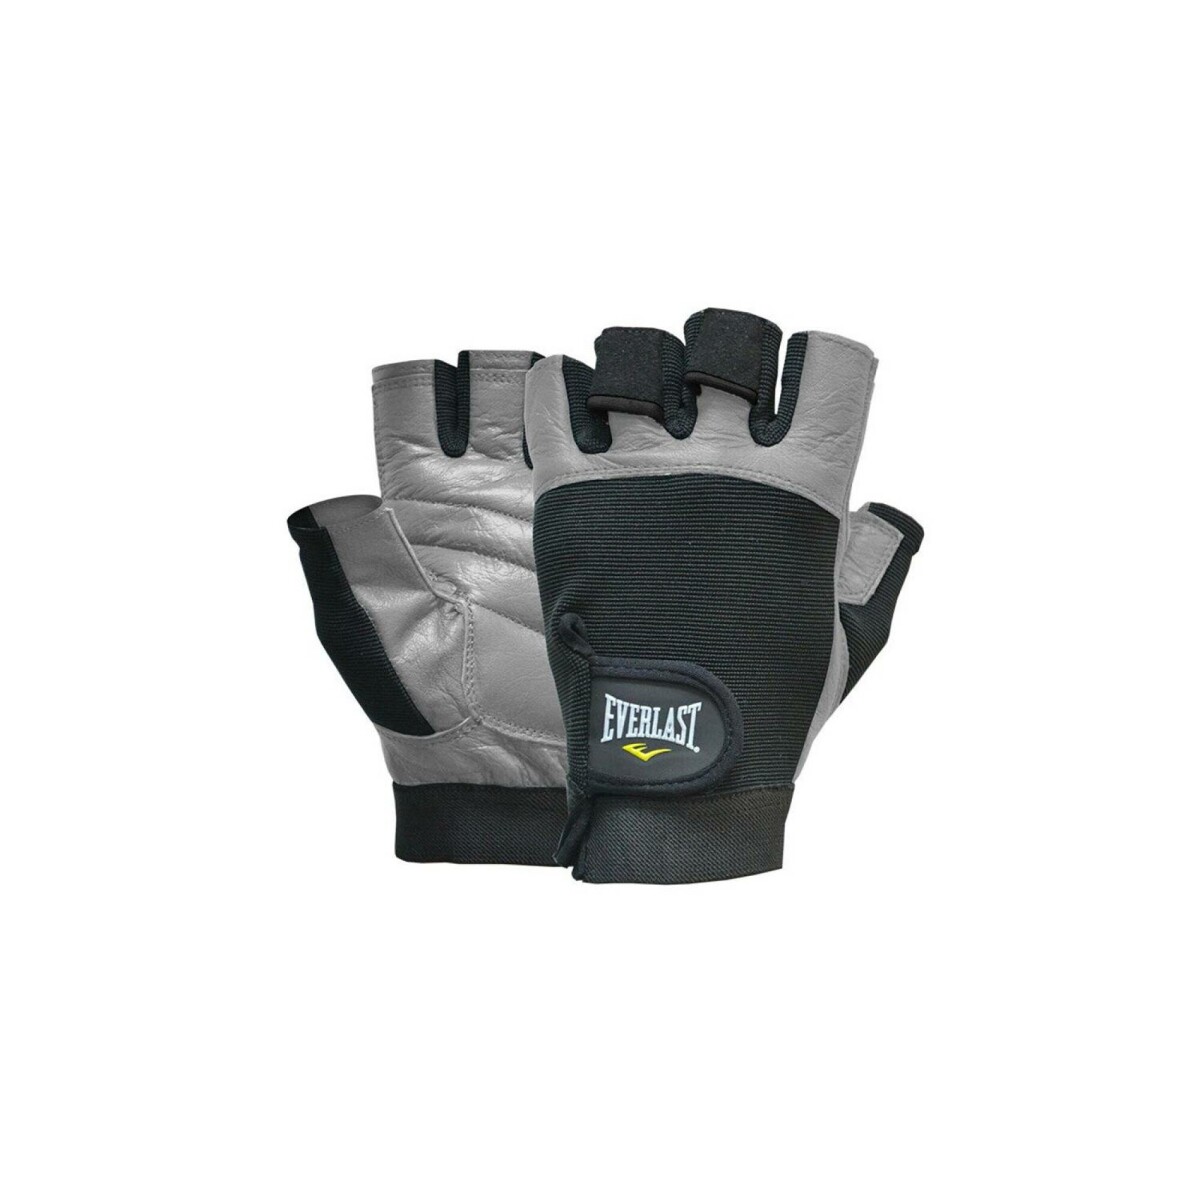 Guante De Pesas Everlast Authority II Gy Gy - S/C 